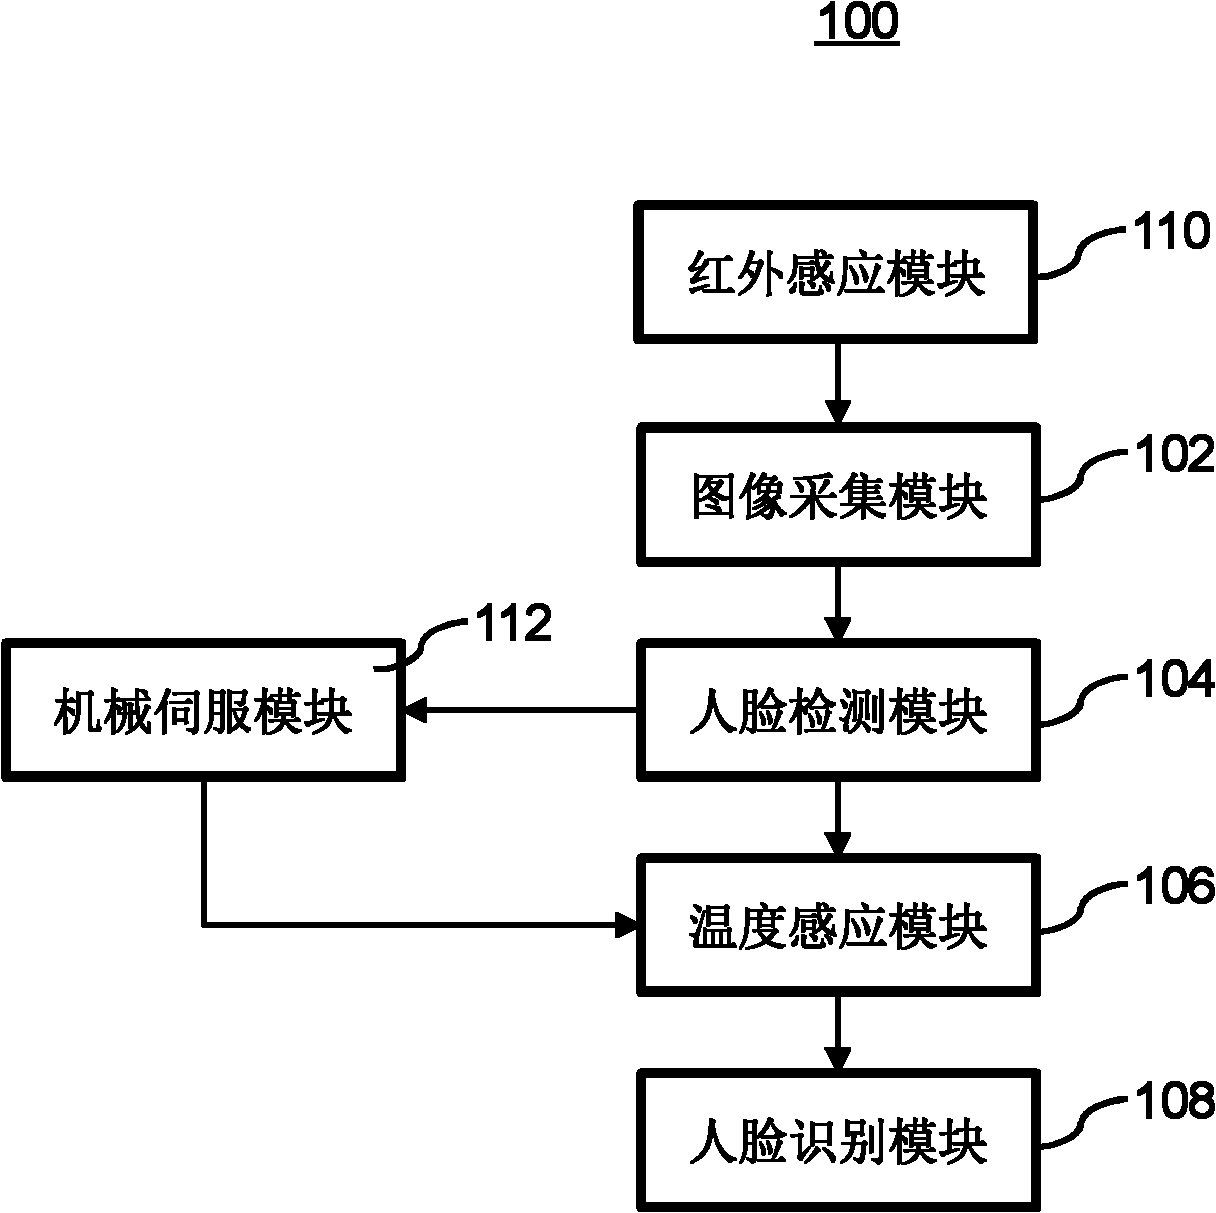 Face identification system and method